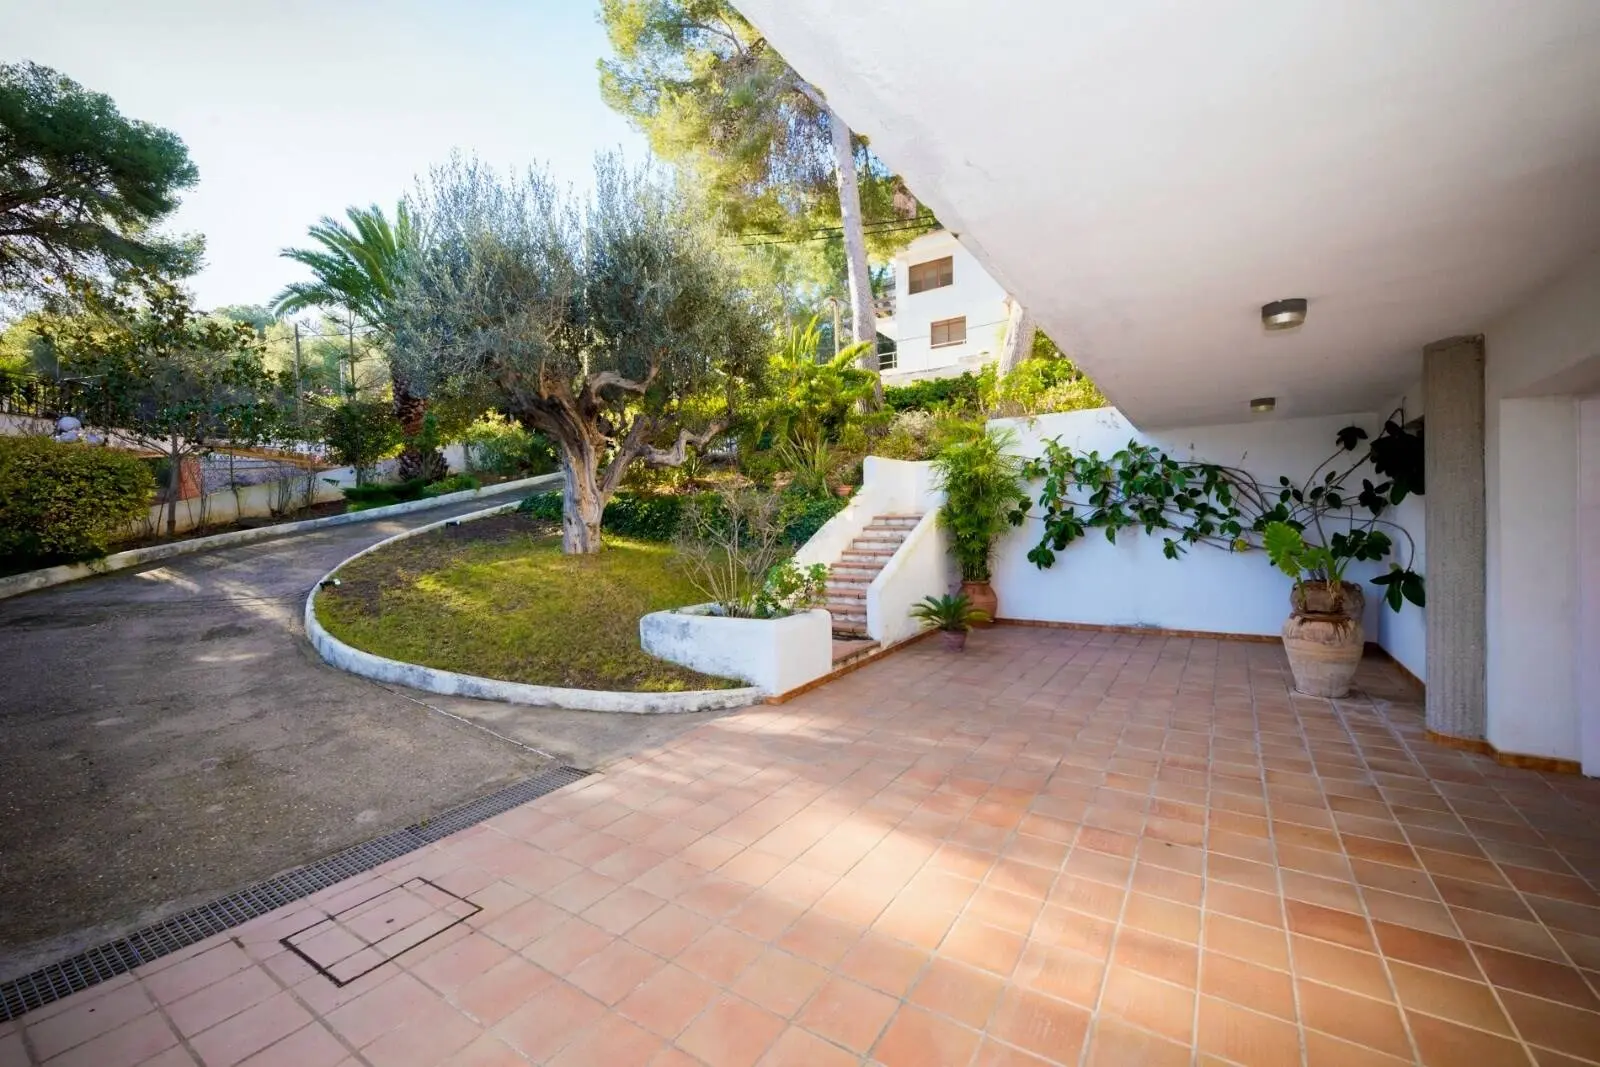 House for sale with a swimming pool in Castelldefels, Barcelona. 25